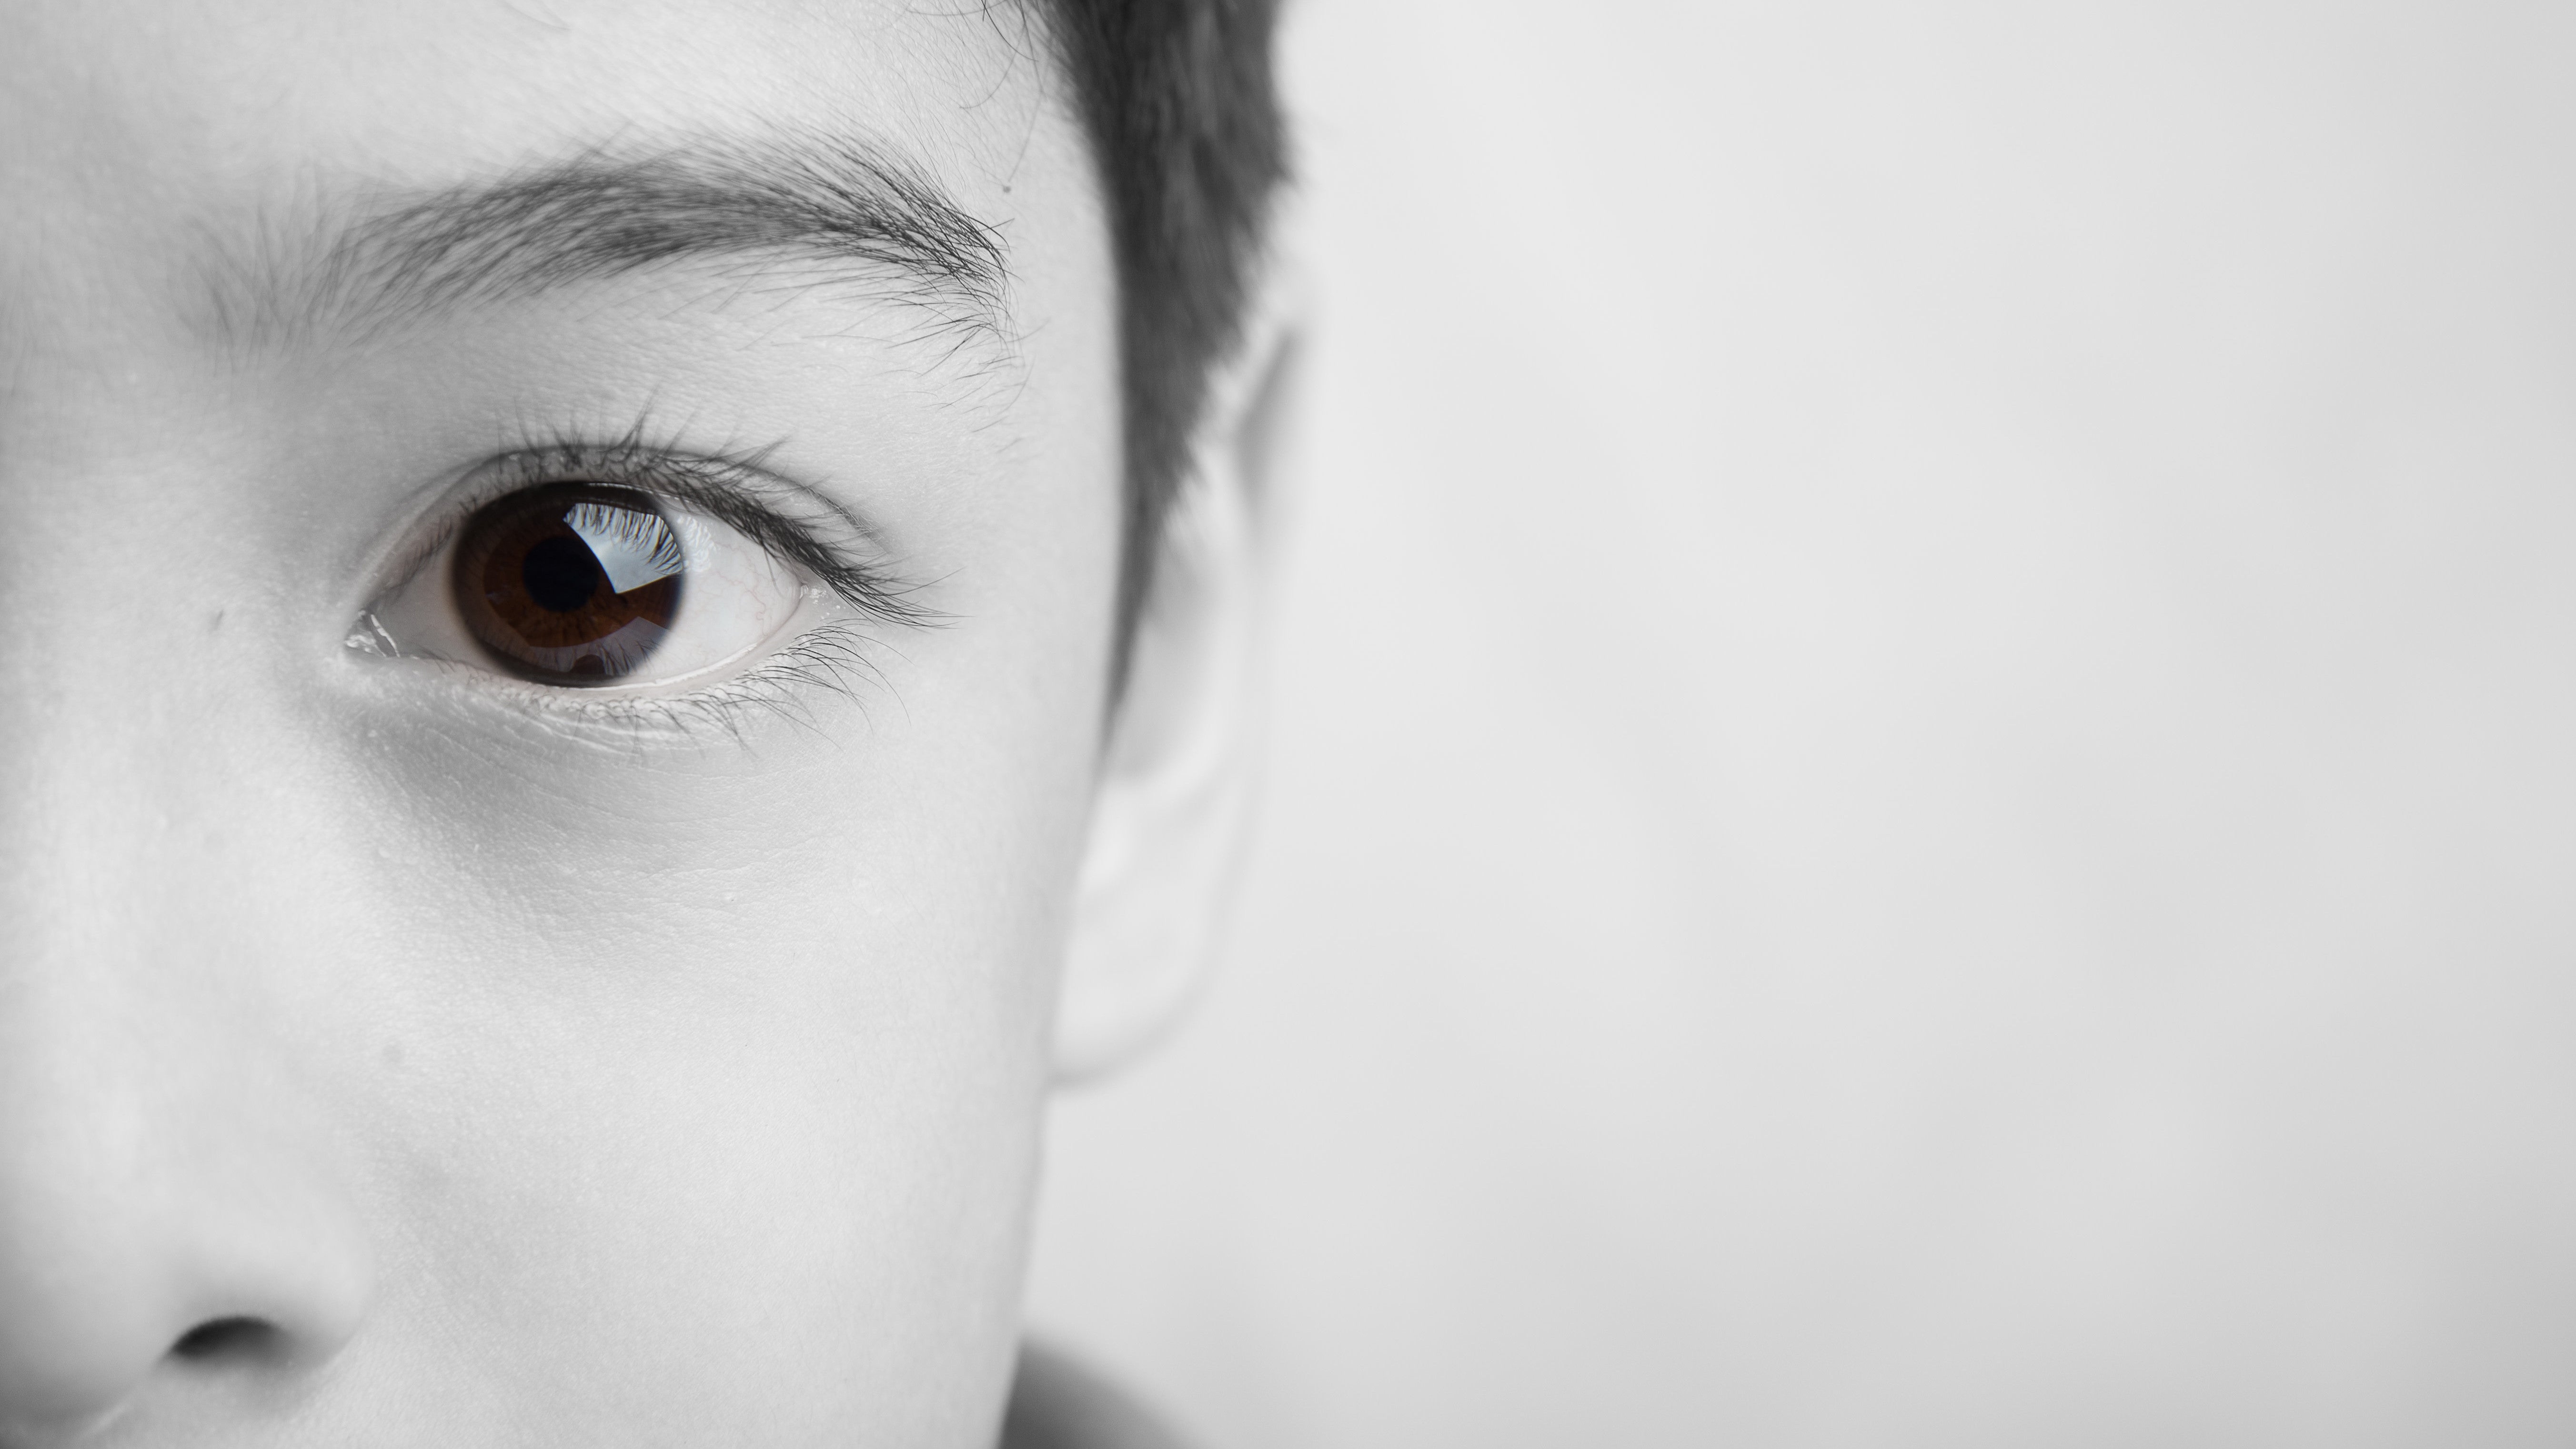 Teach Kids About Racism With The ‘Brown Eye Blue Eye’ Exercise